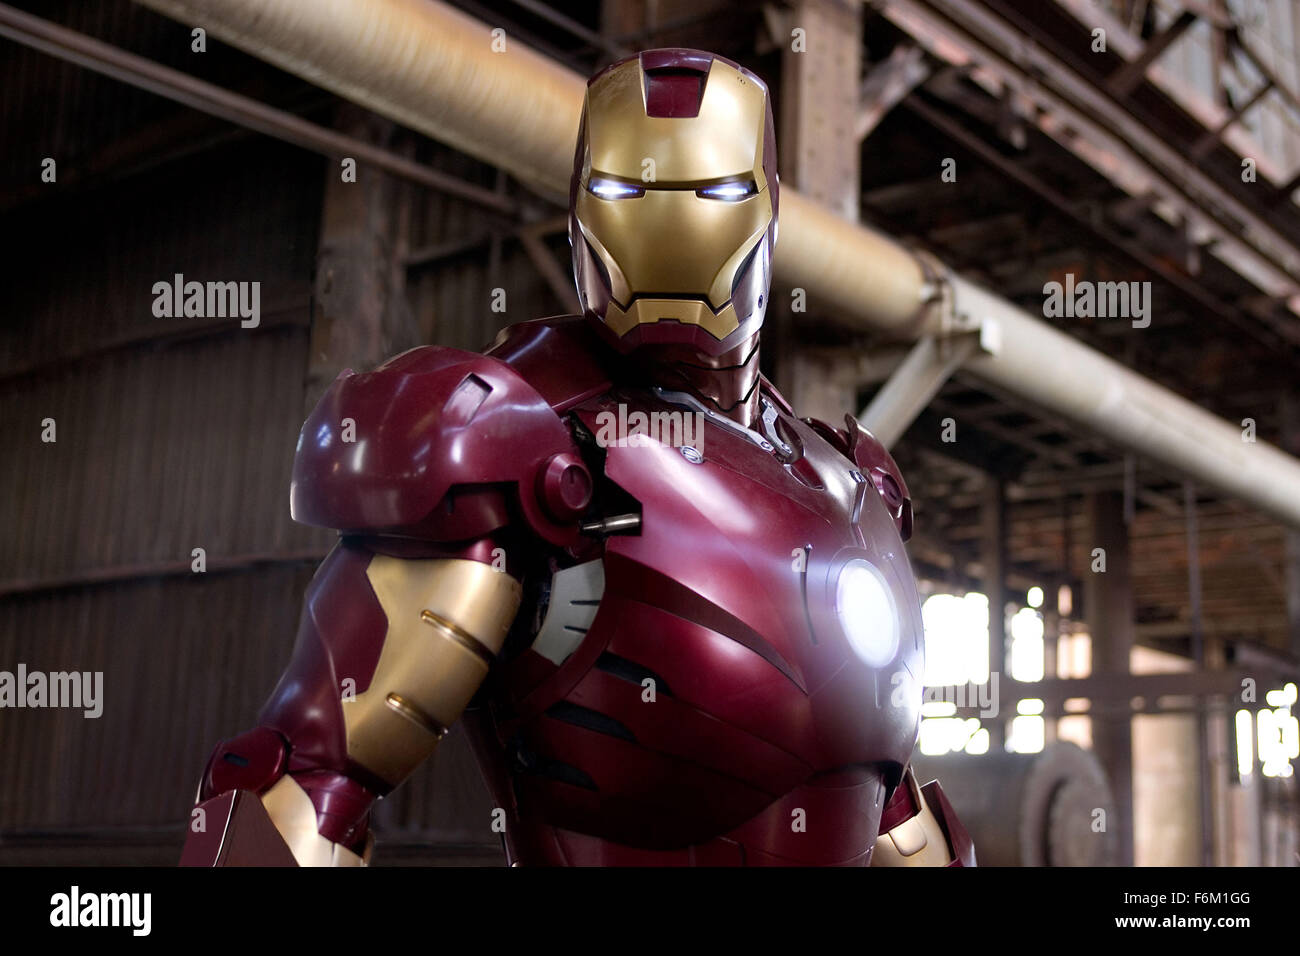 RELEASE DATE: May 2, 2008. MOVIE TITLE: Iron Man. STUDIO ...